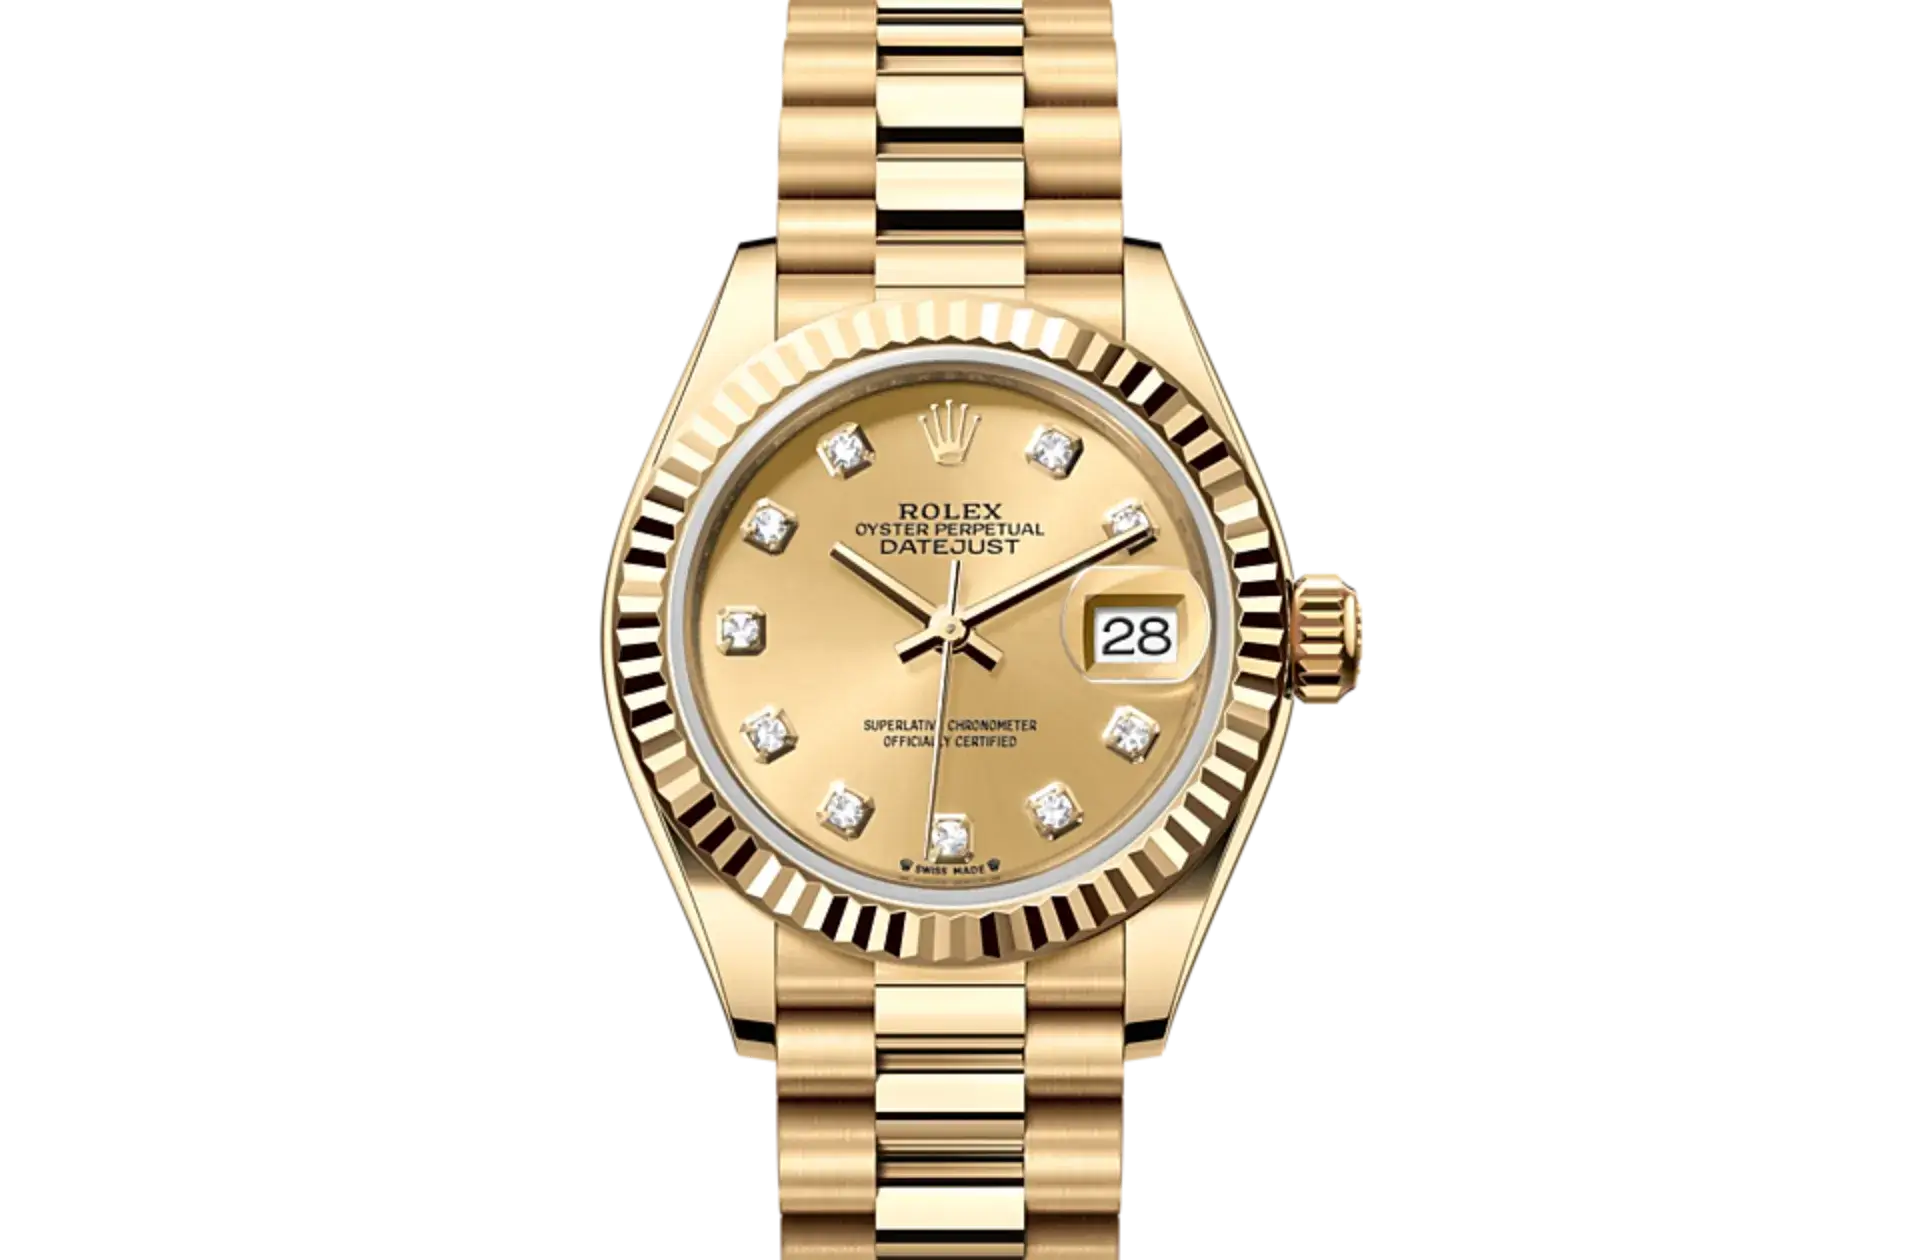 Gold Rolex Datejust watch with diamond hour markers on a striped black background.